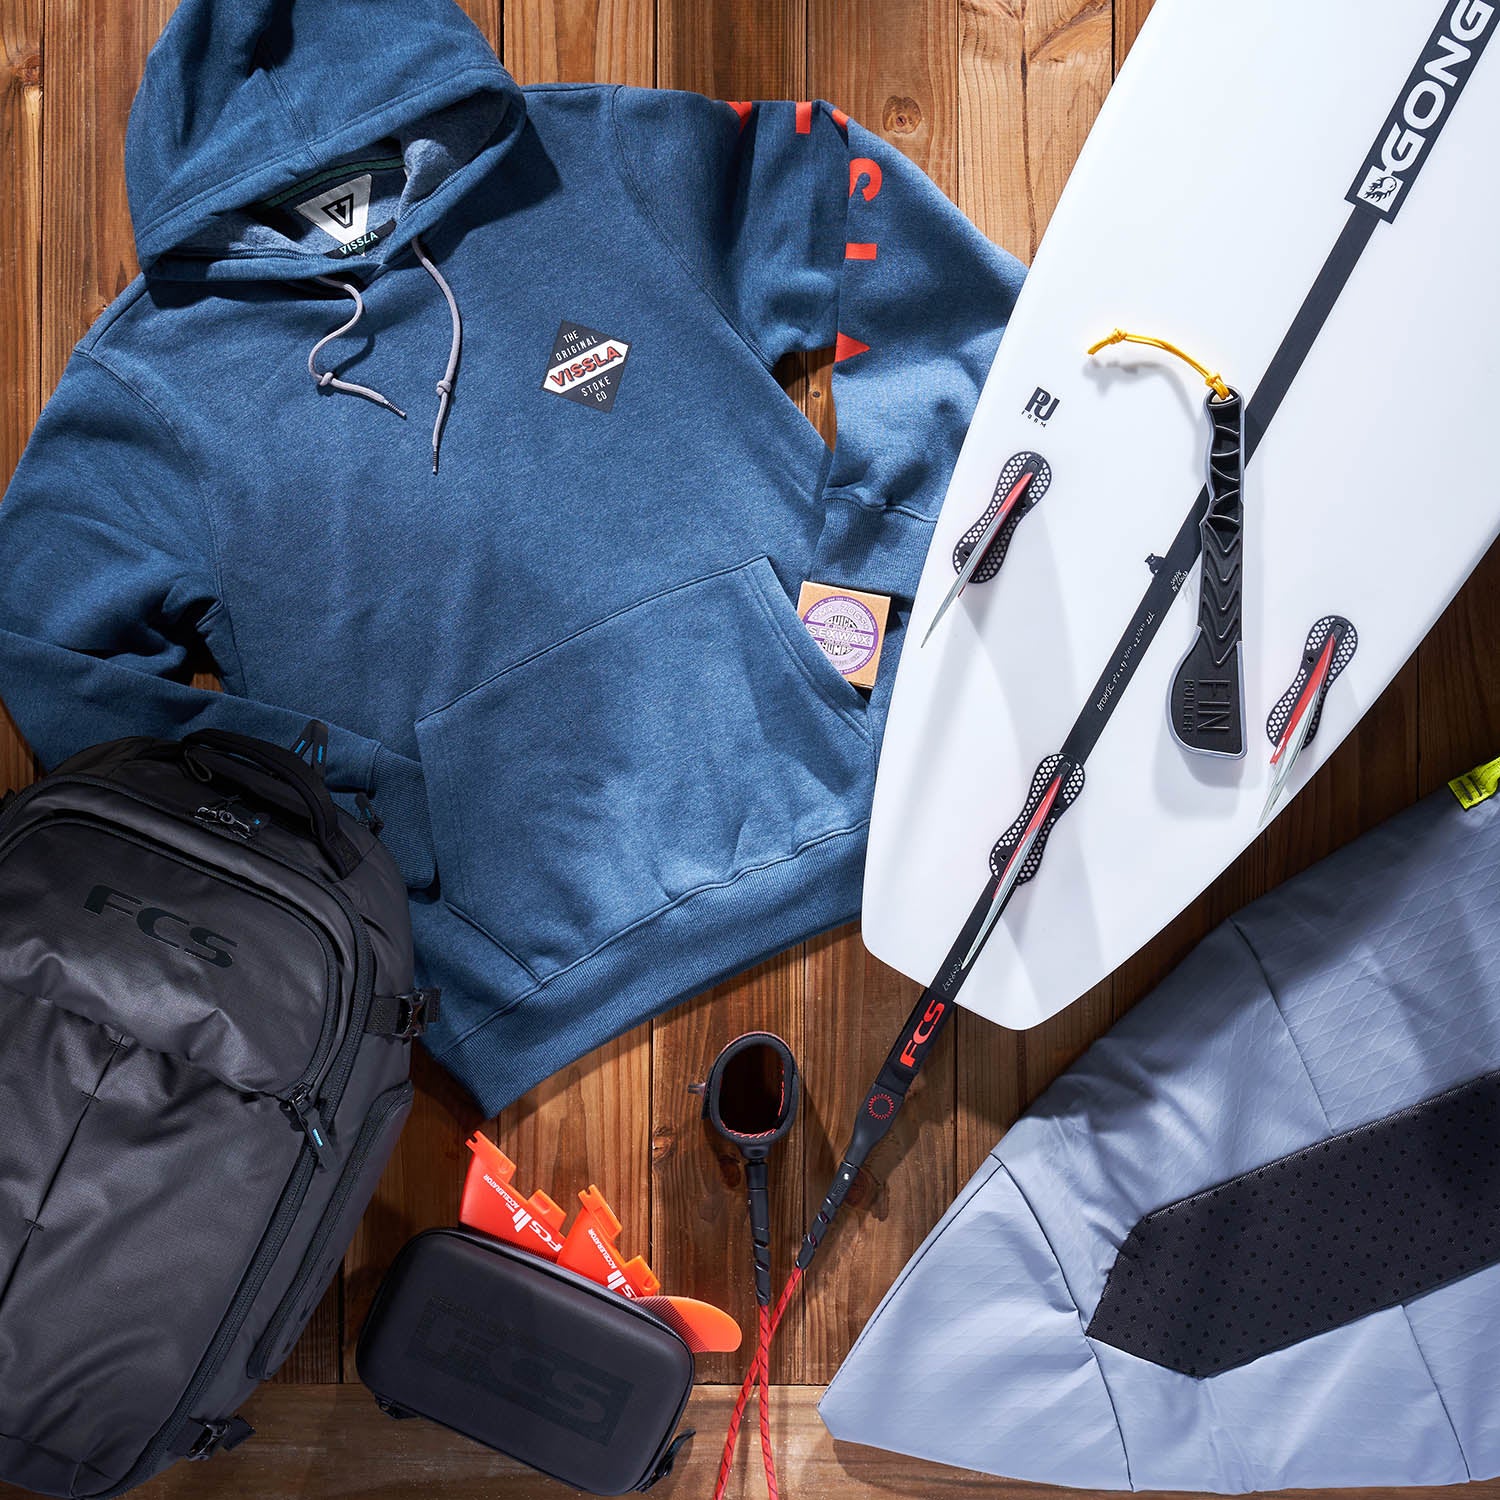 SHOP : FULLY EQUIPPED SURF TRIP!